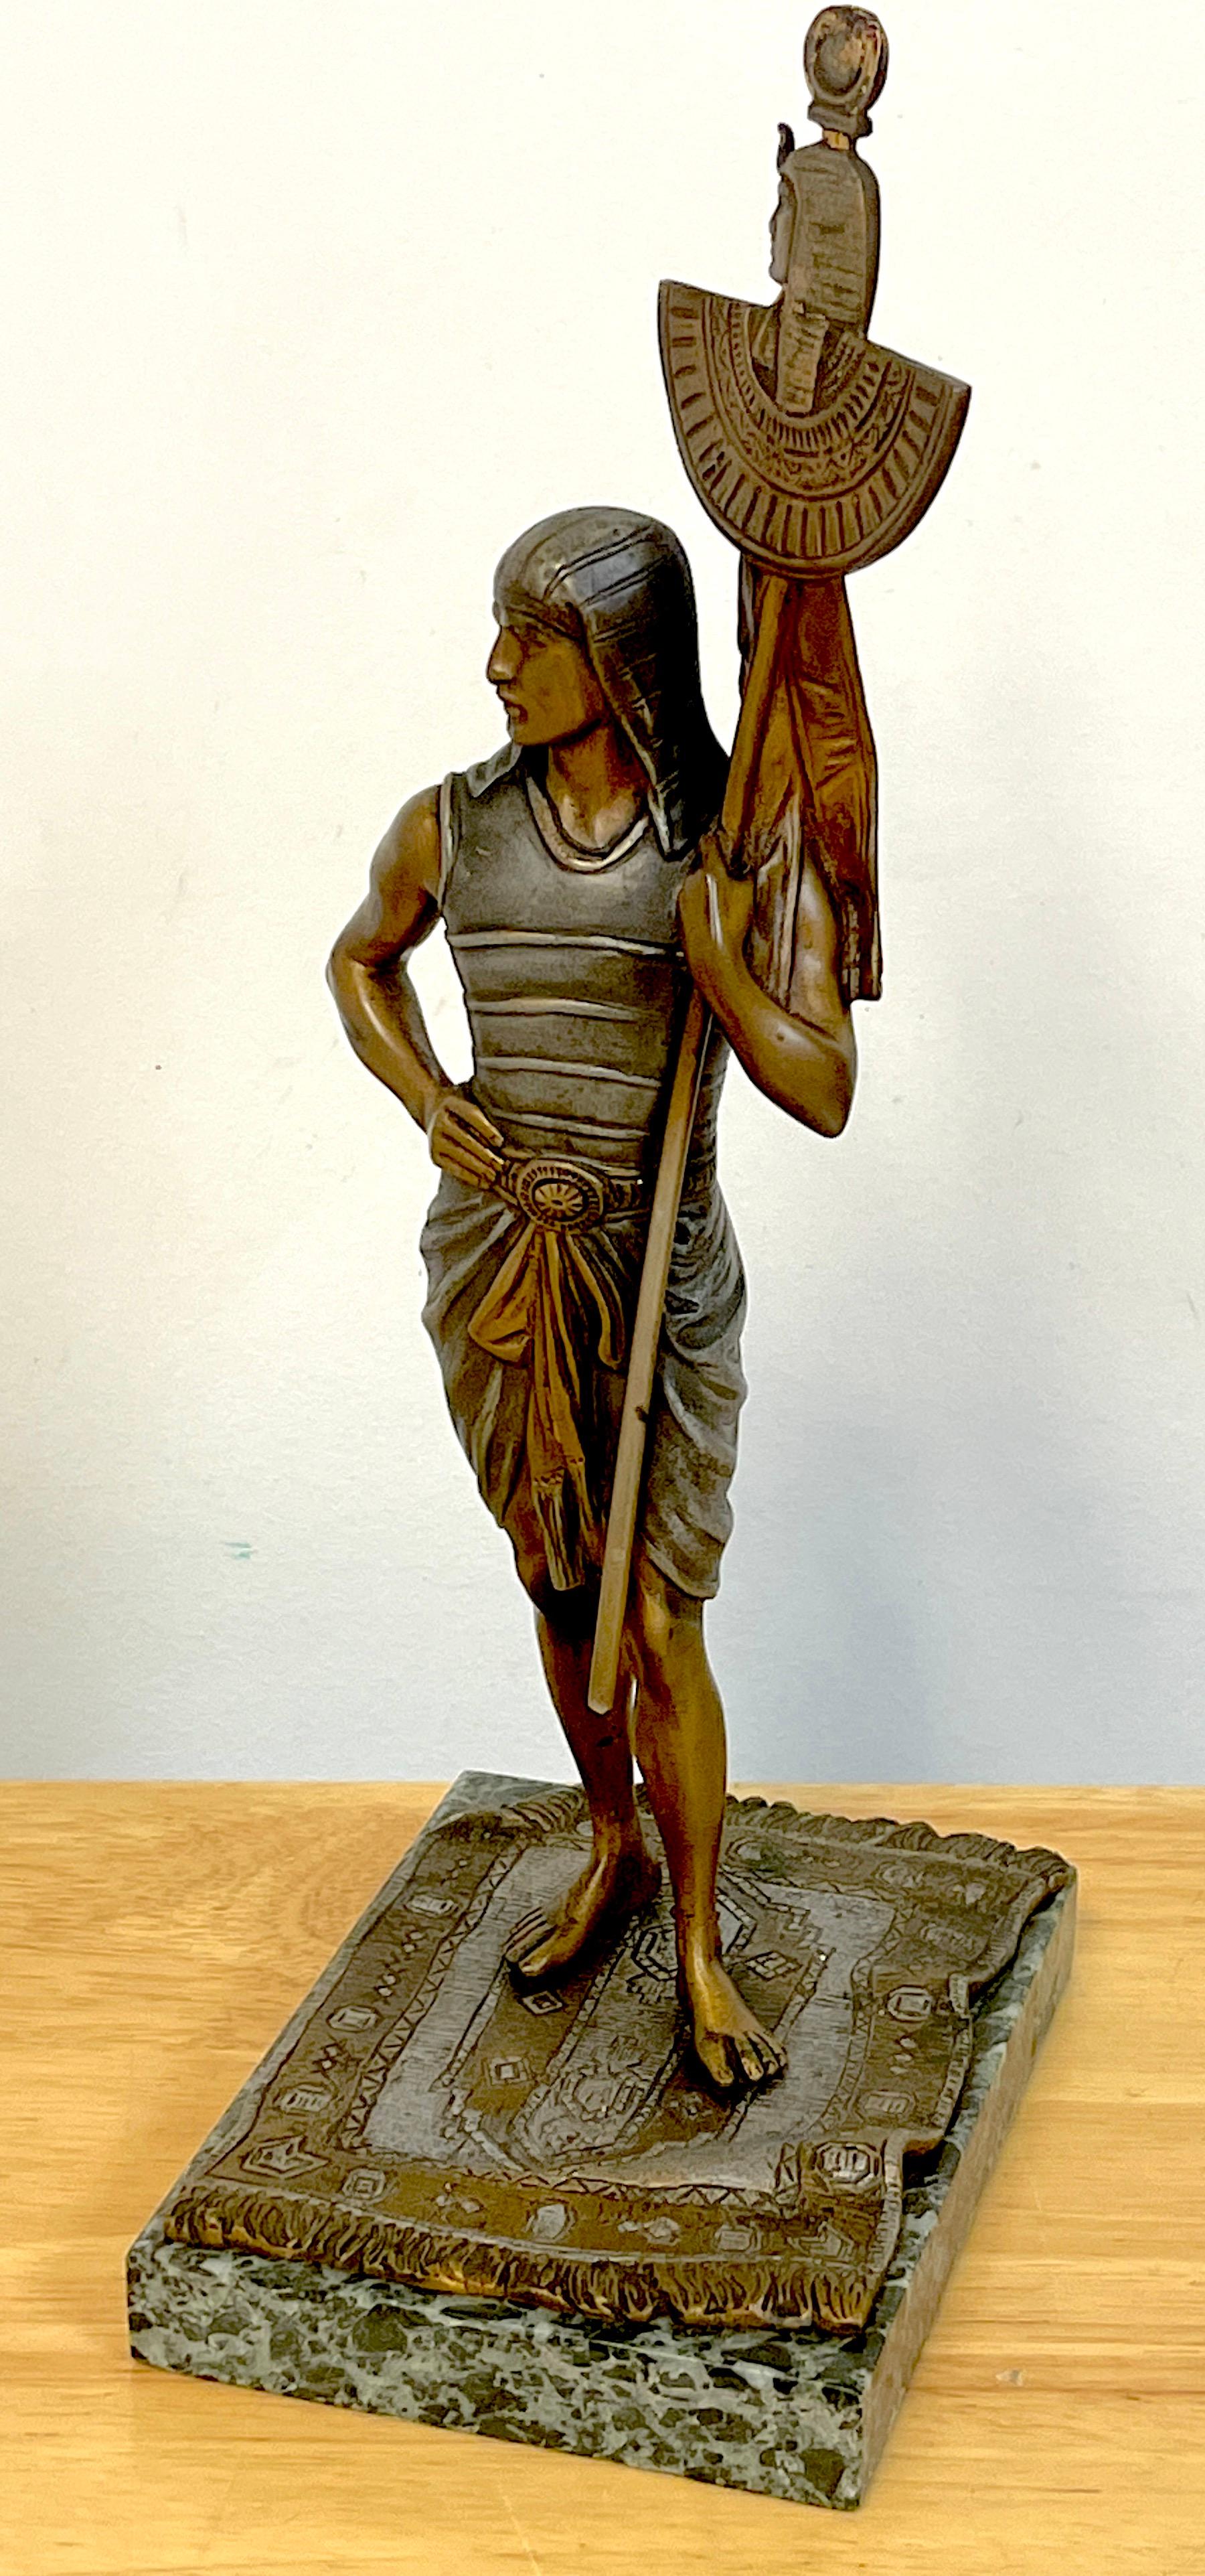 Vienna cold painted bronze Egyptian attendant, attributed to Bergman
With exquisite detail the standing Egyptian attendant standing on a Persian rug holding a ceremonial staff.
Apparently unsigned. Raised on a verdigris marble base measures 4.25